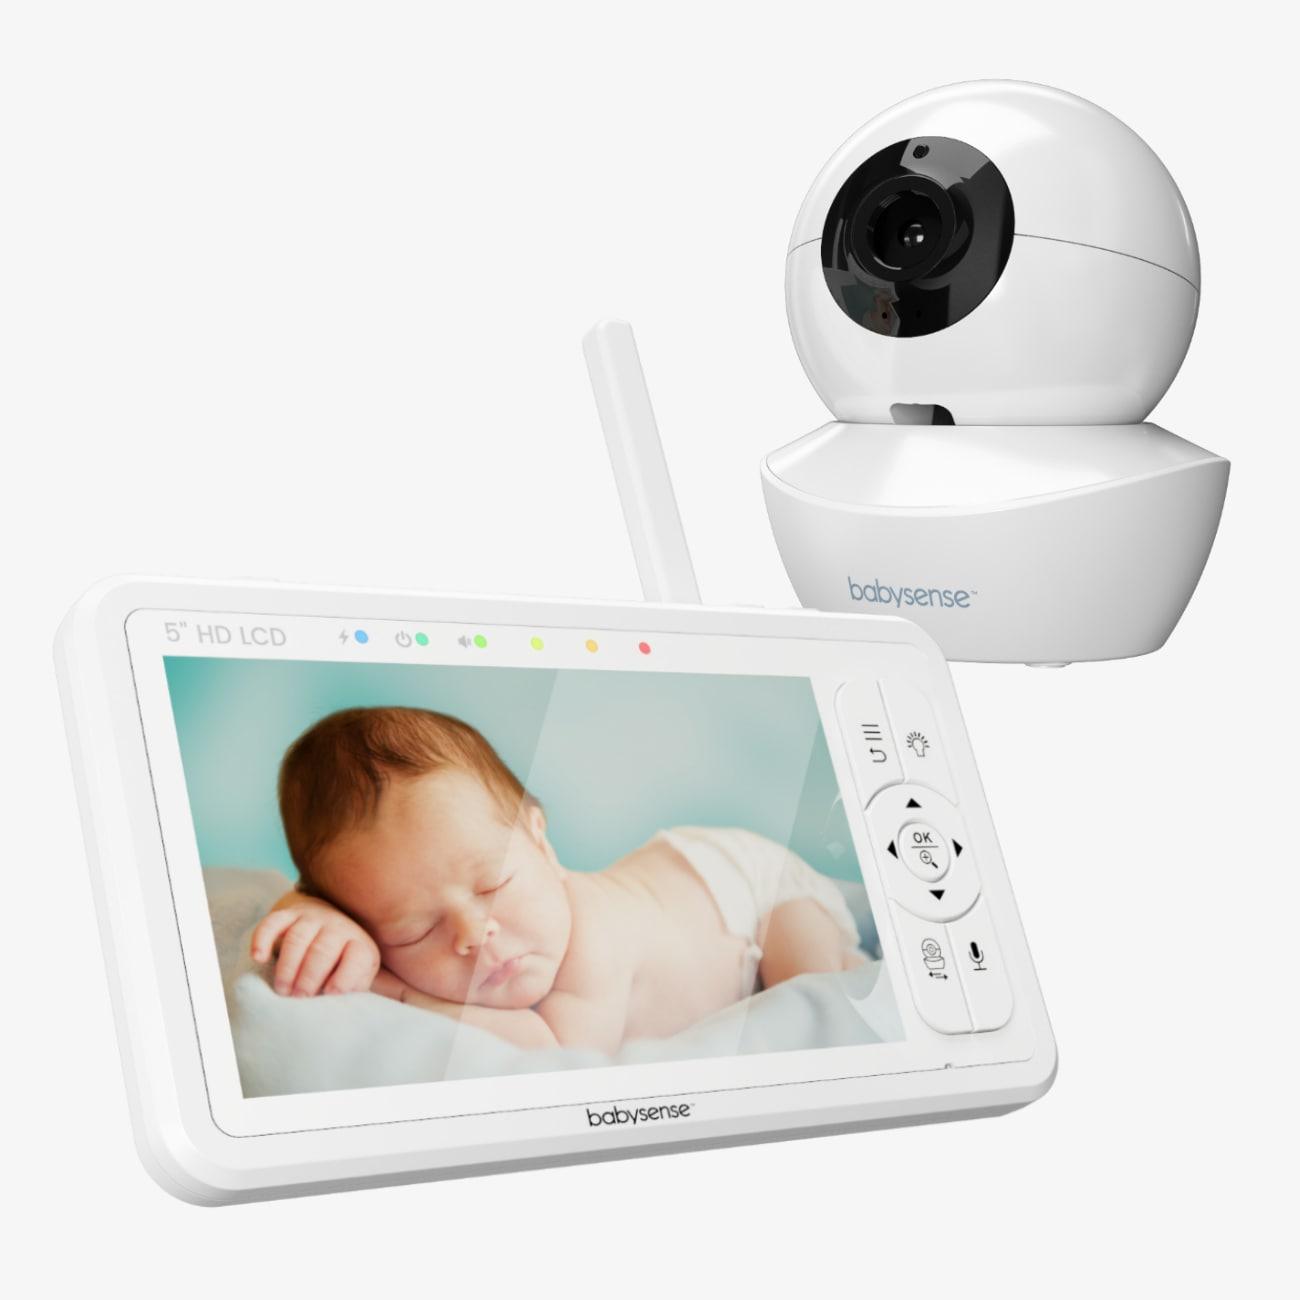  Momcozy Baby Monitor with 2 Cameras 5' 1080P Split Screen Video  Baby Monitor with Camera and Audio no WiFi for Baby Safety 5000mAh Battery  Infrared Night Vision 2-Way Audio 960ft Range